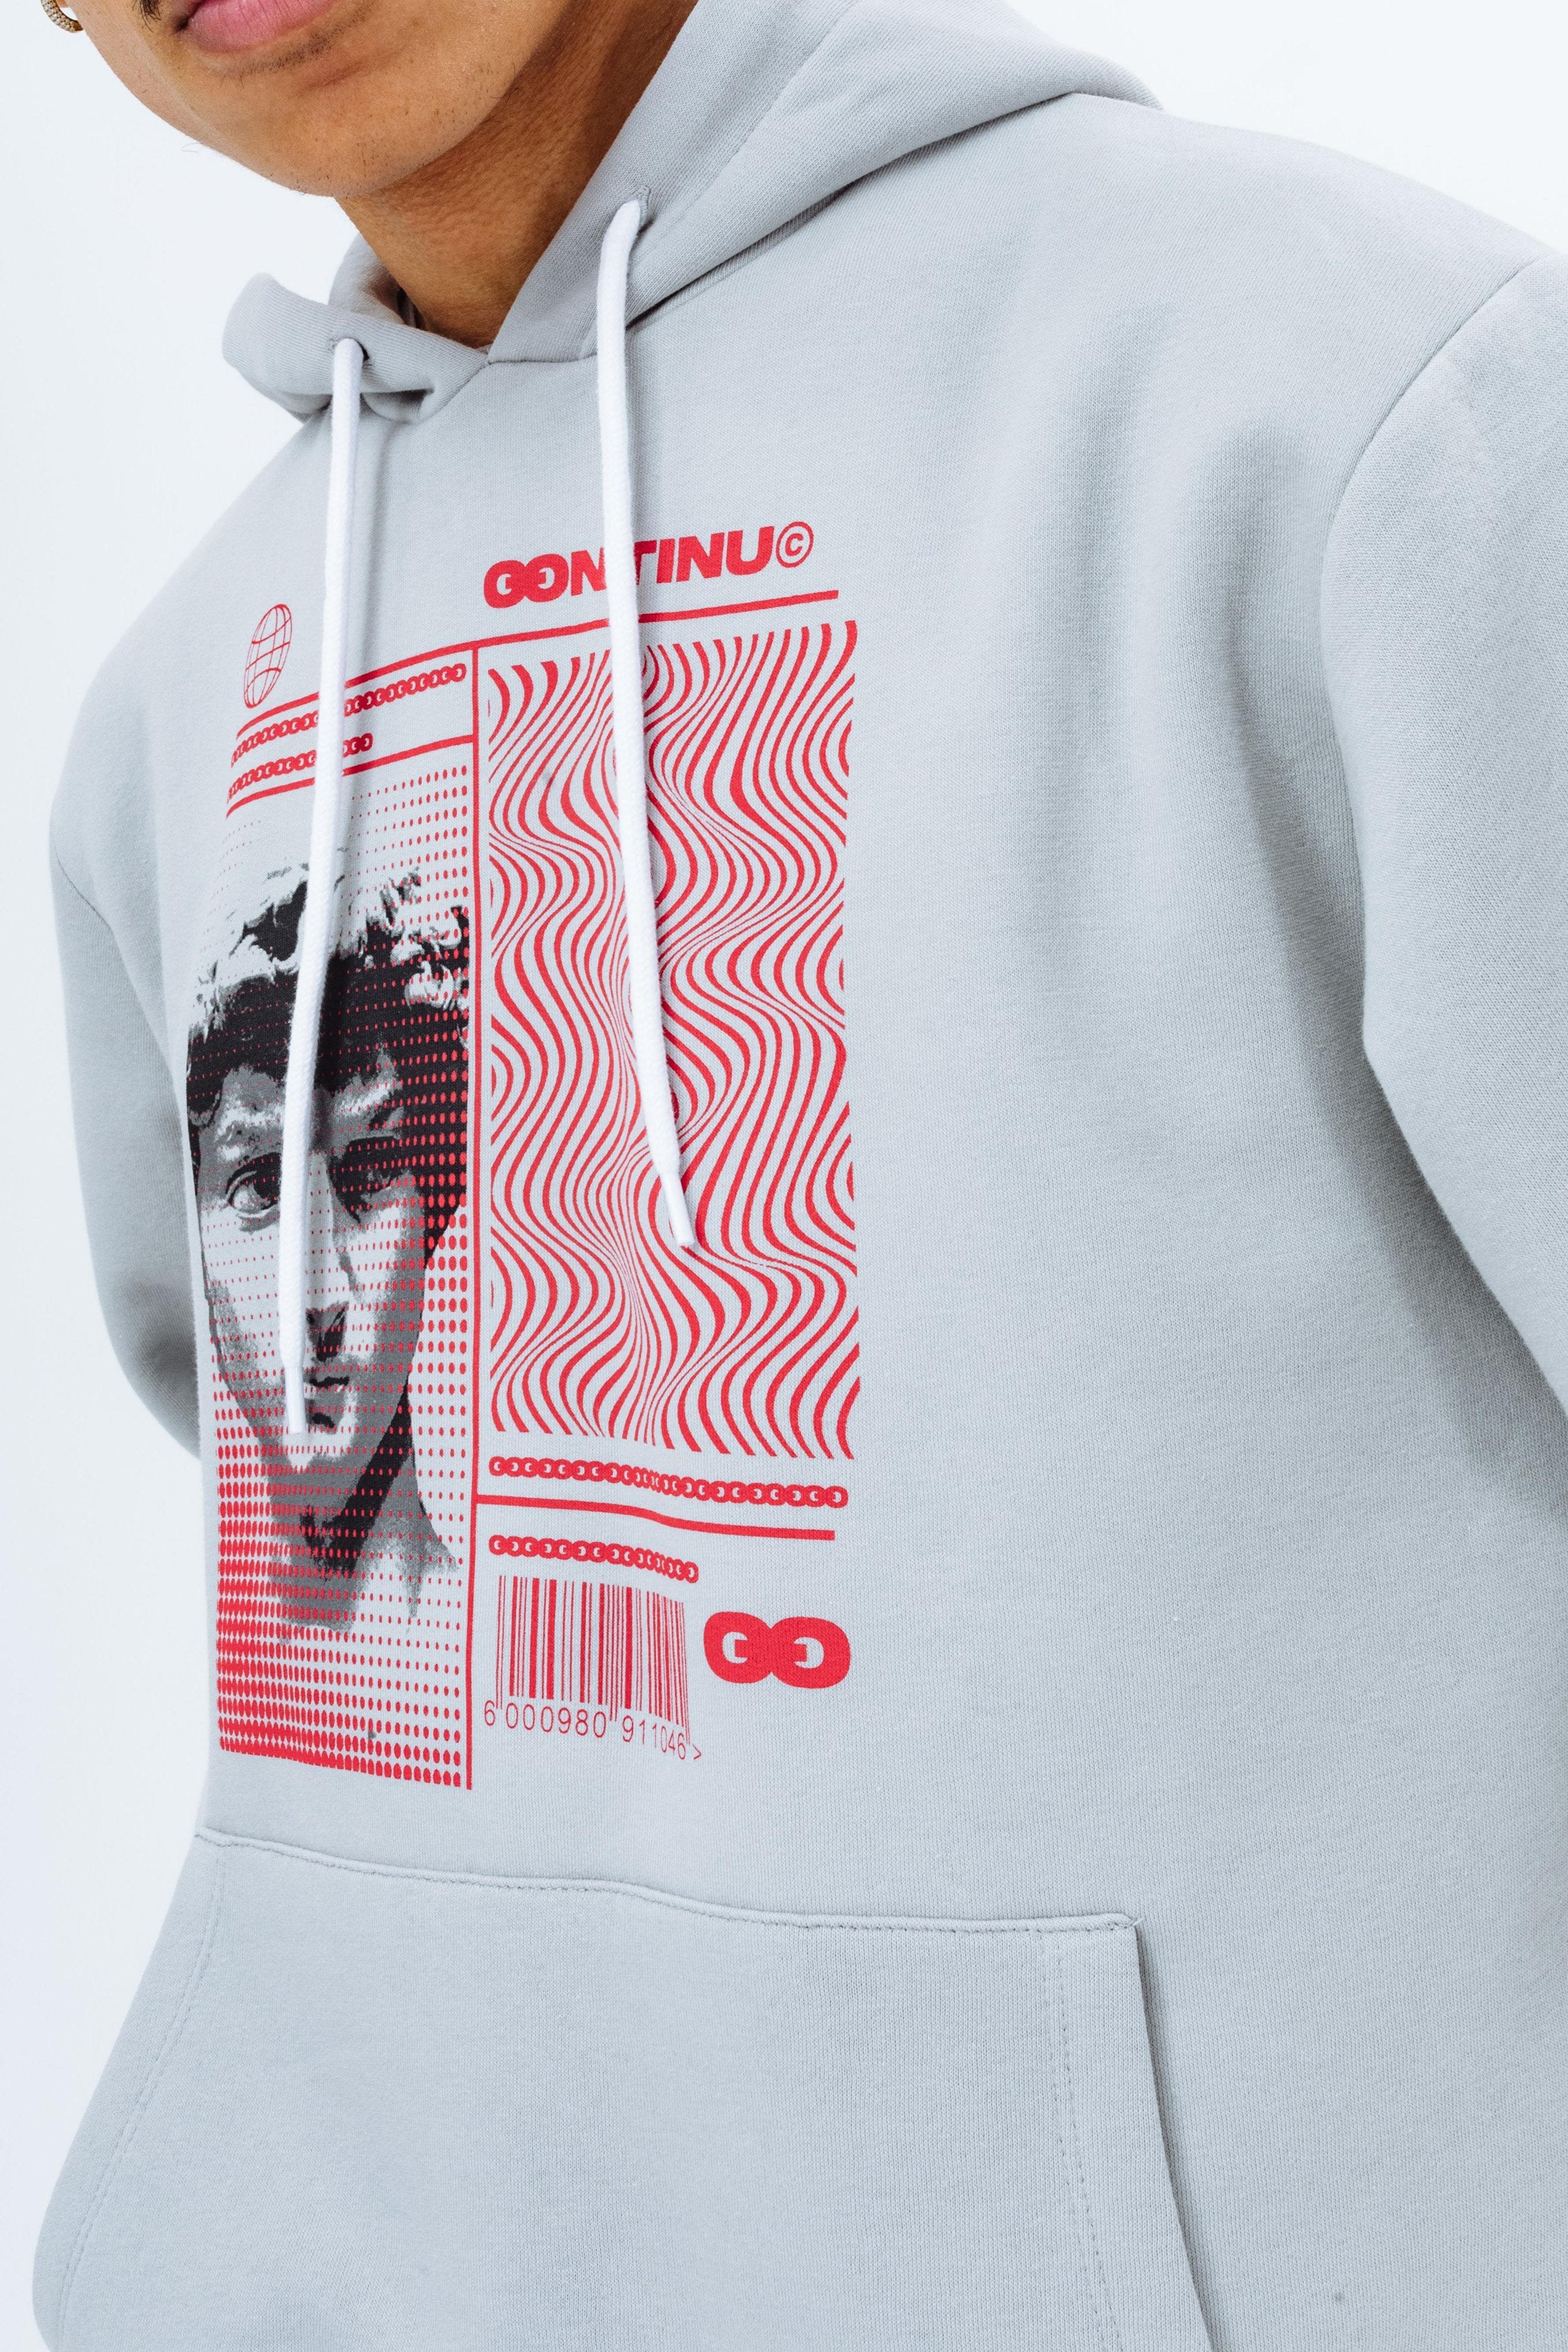 Alternate View 4 of CONTINU8 GREY GRAPHIC OVERSIZED HOODIE